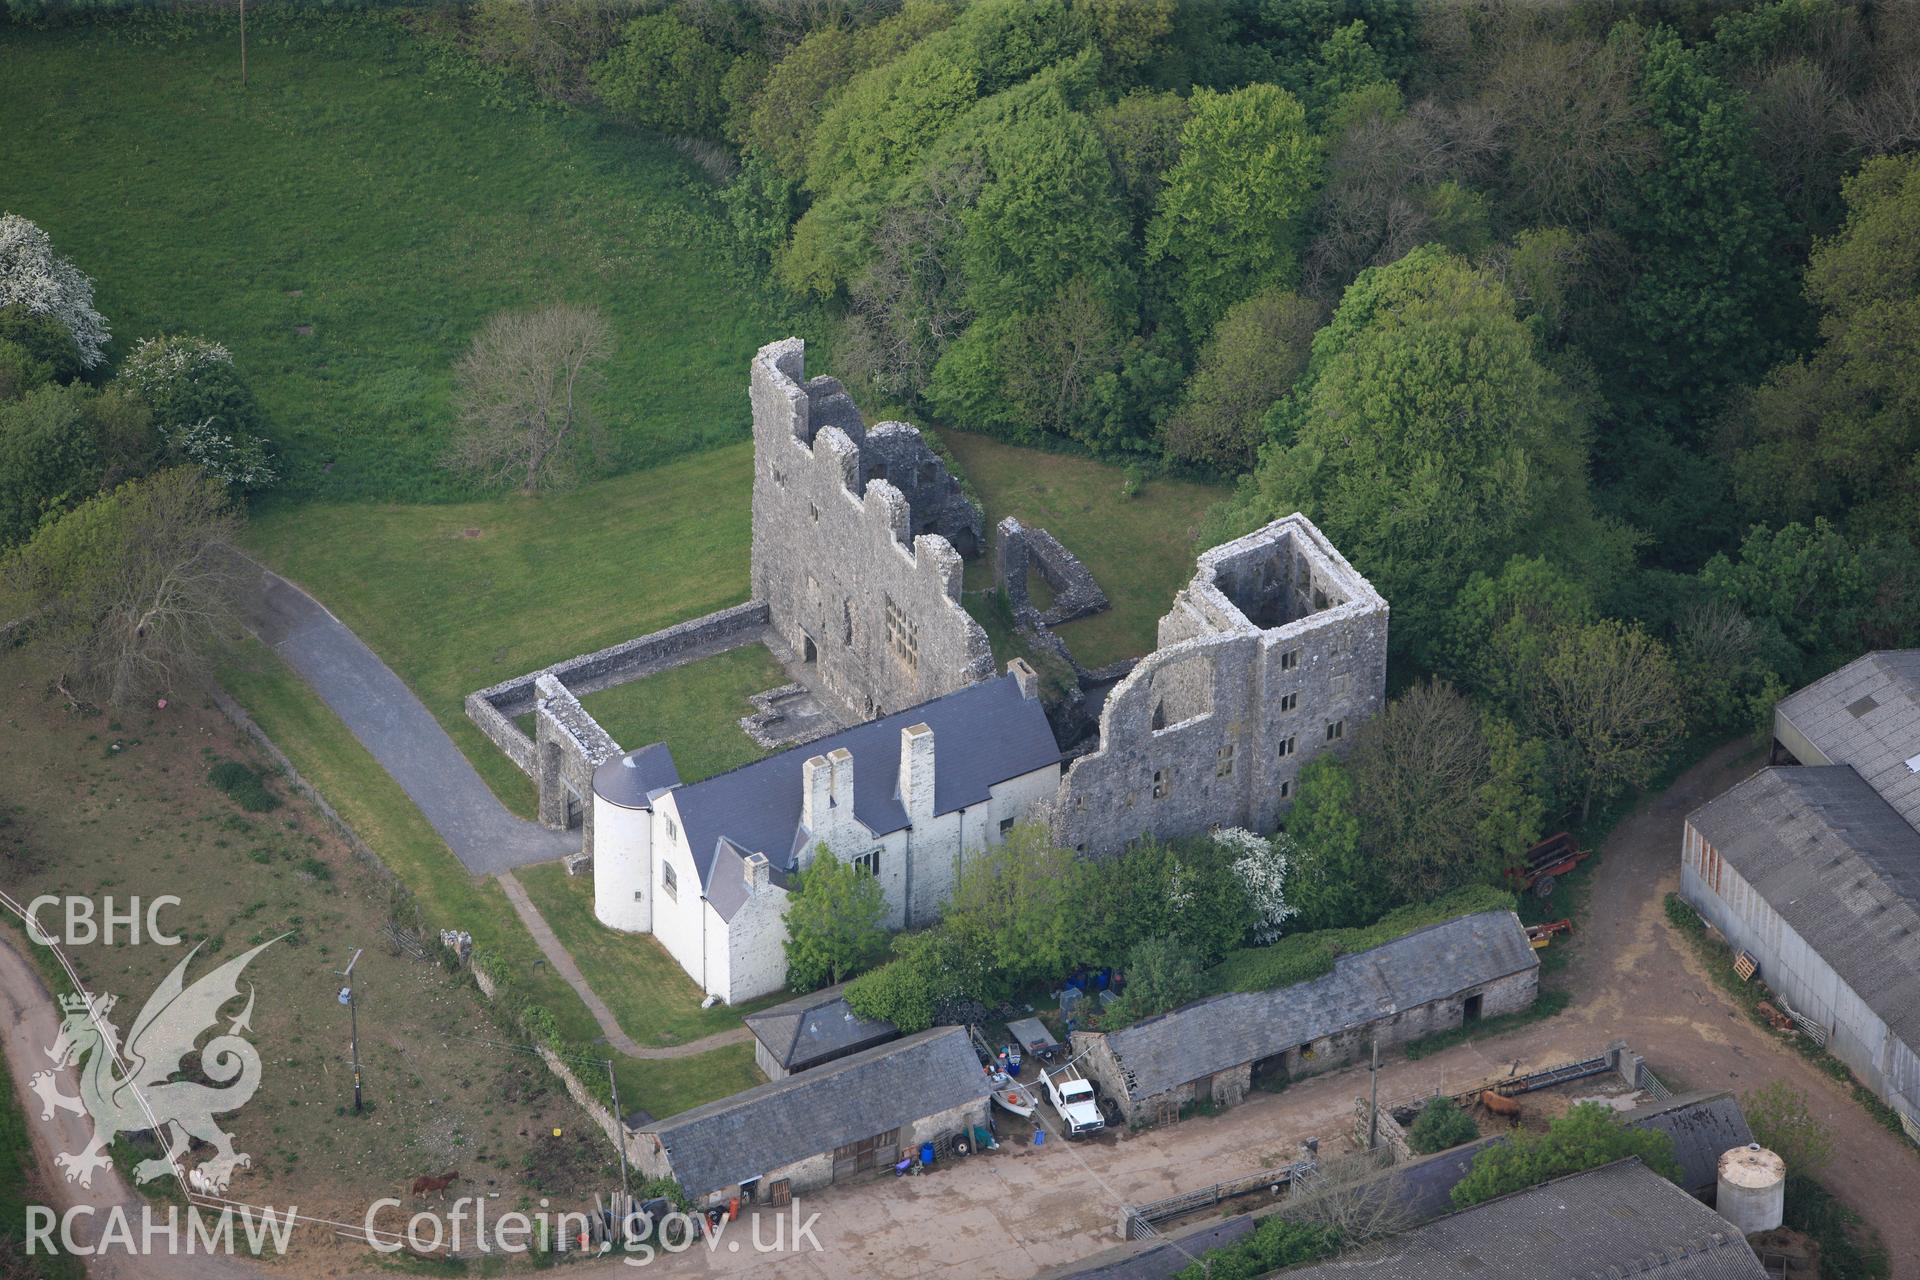 RCAHMW colour oblique photograph of Oxwich Castle. Taken by Toby Driver and Oliver Davies on 04/05/2011.